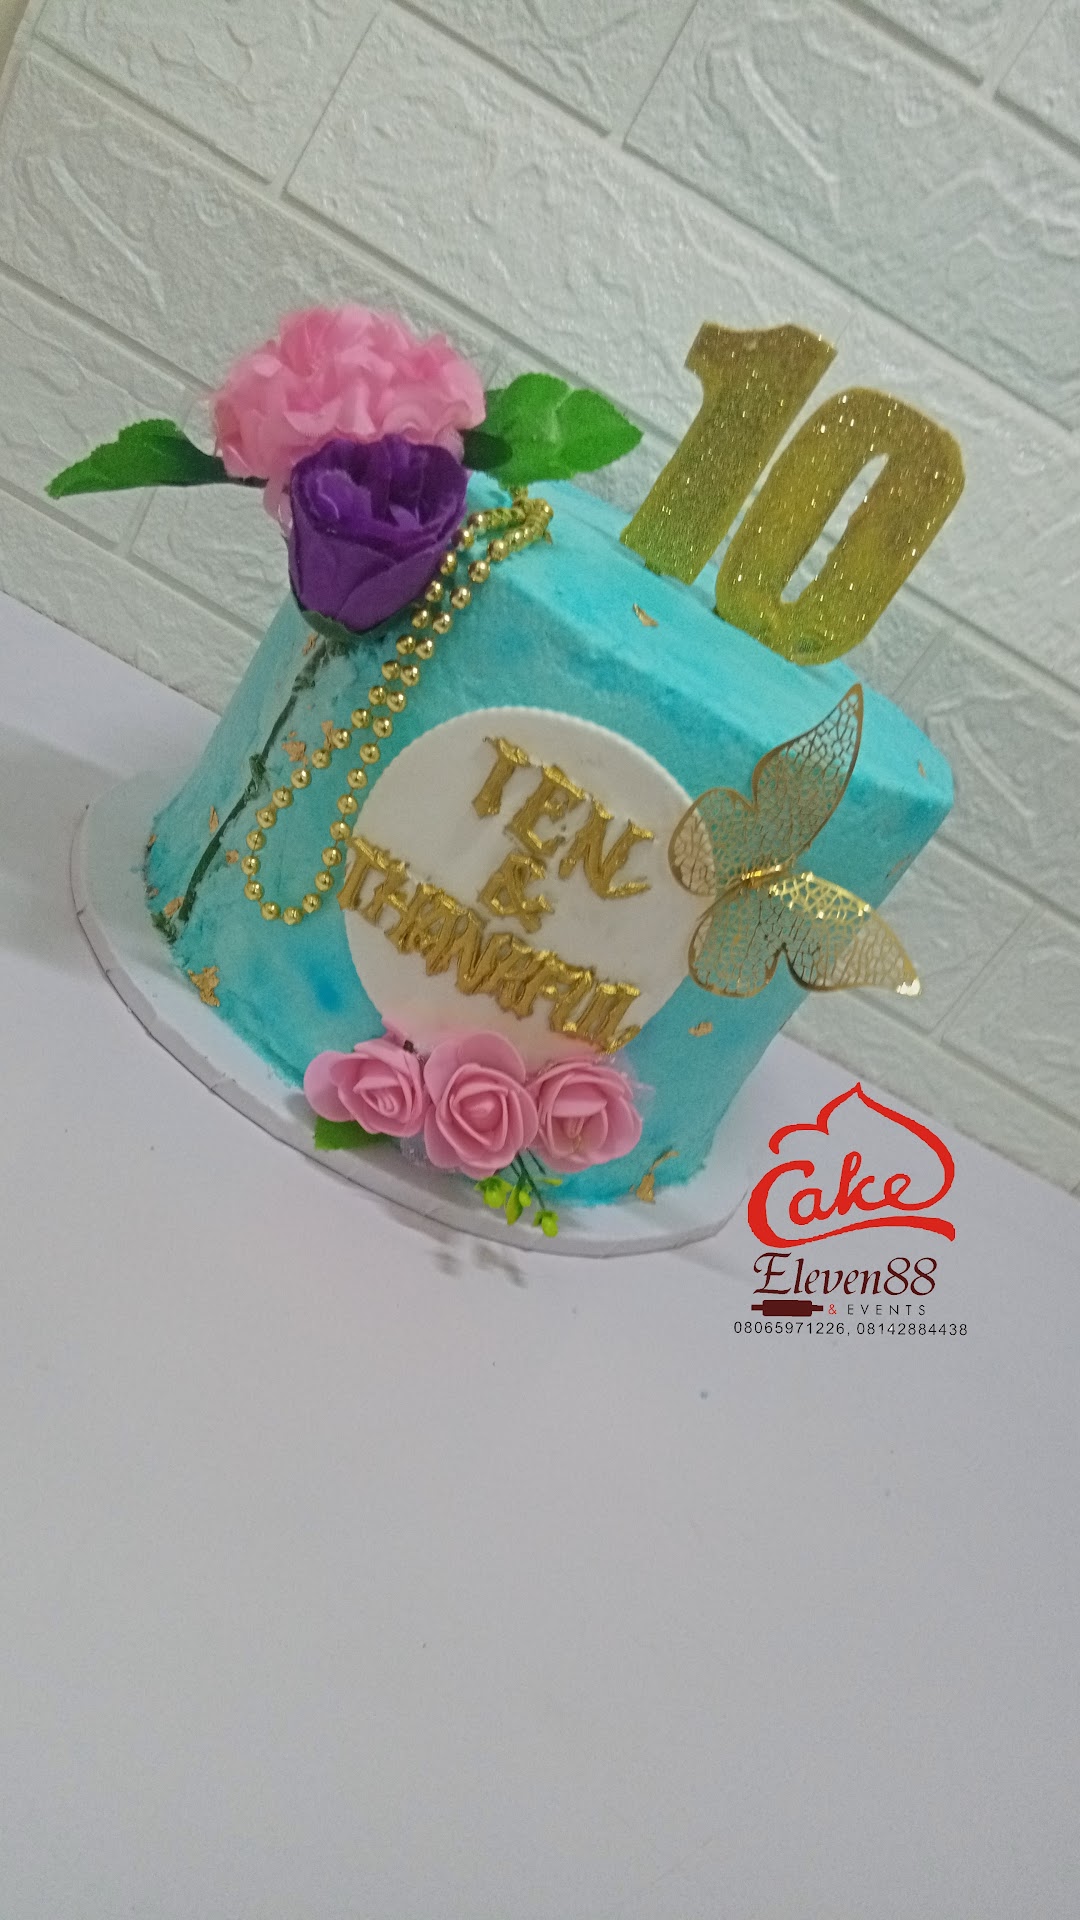 Eleven88 cakes n events